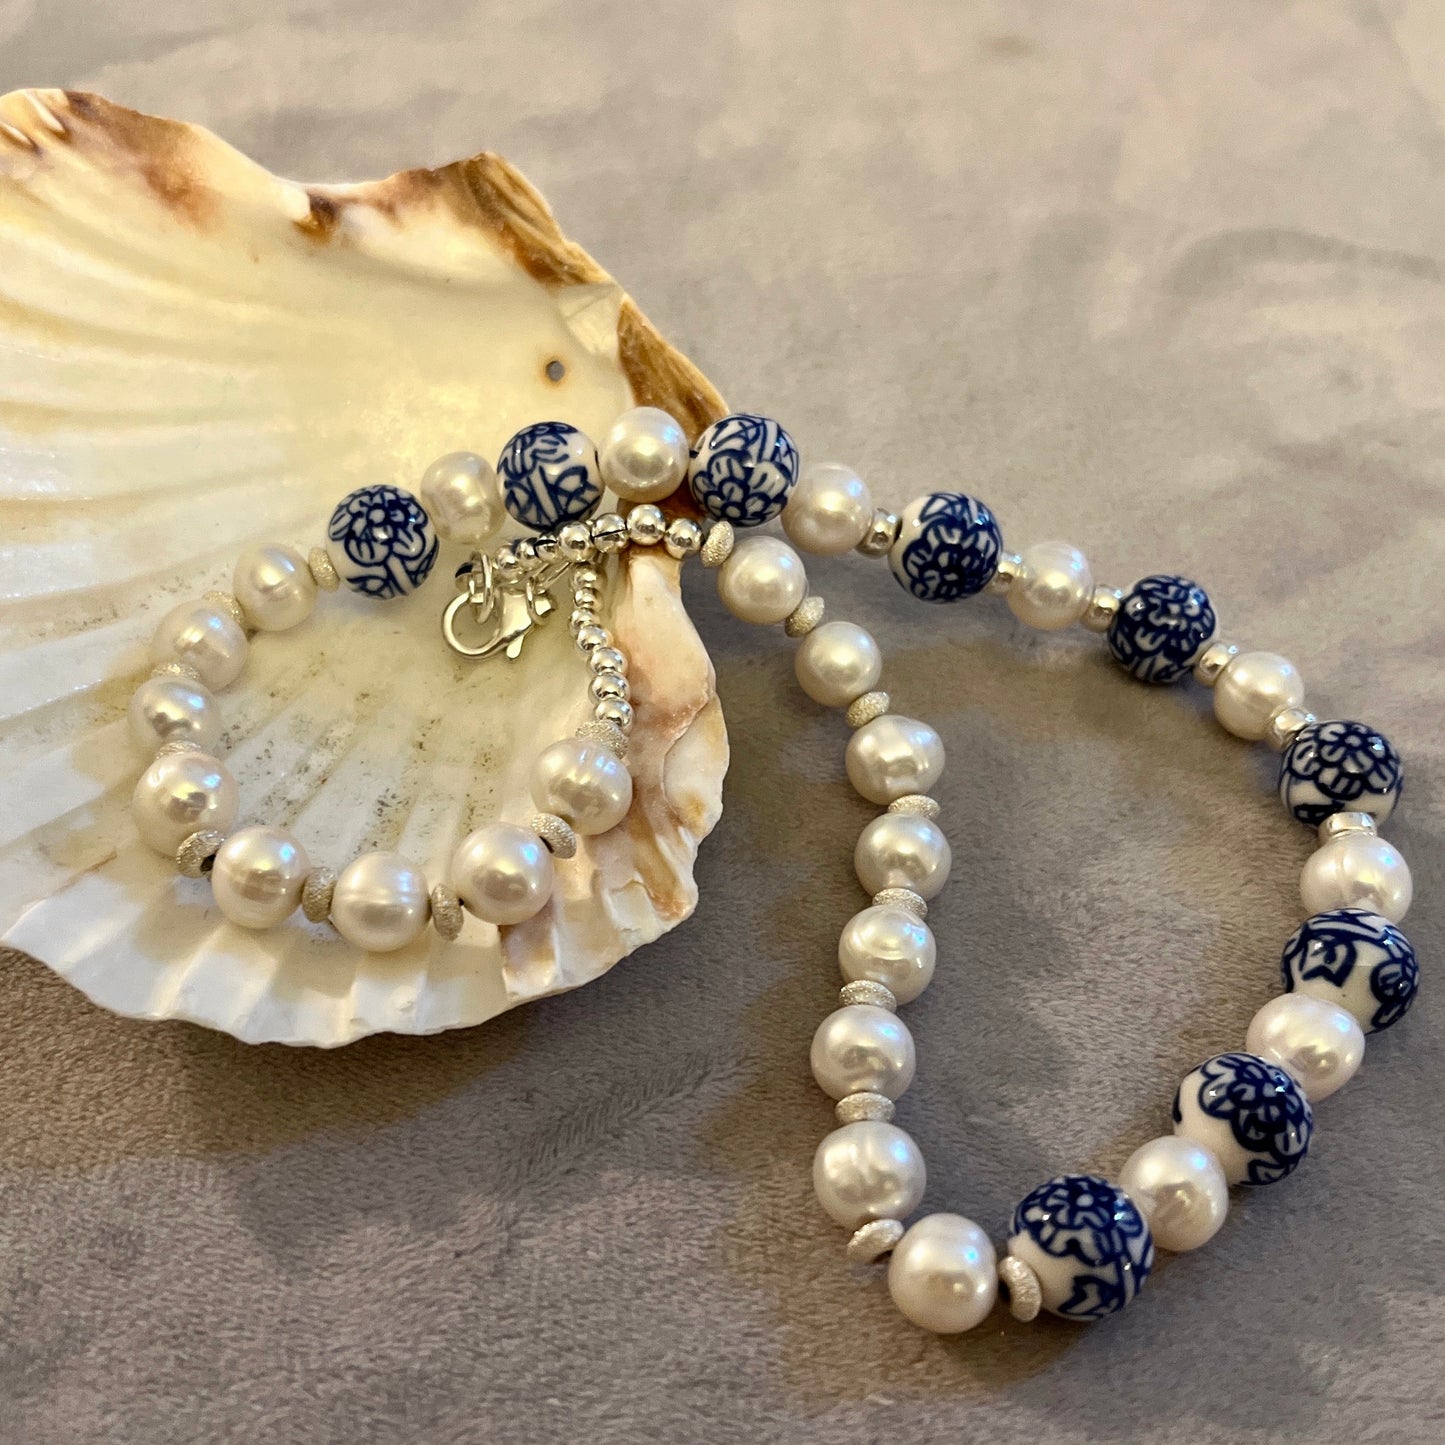 Pearl and ceramic bead necklace